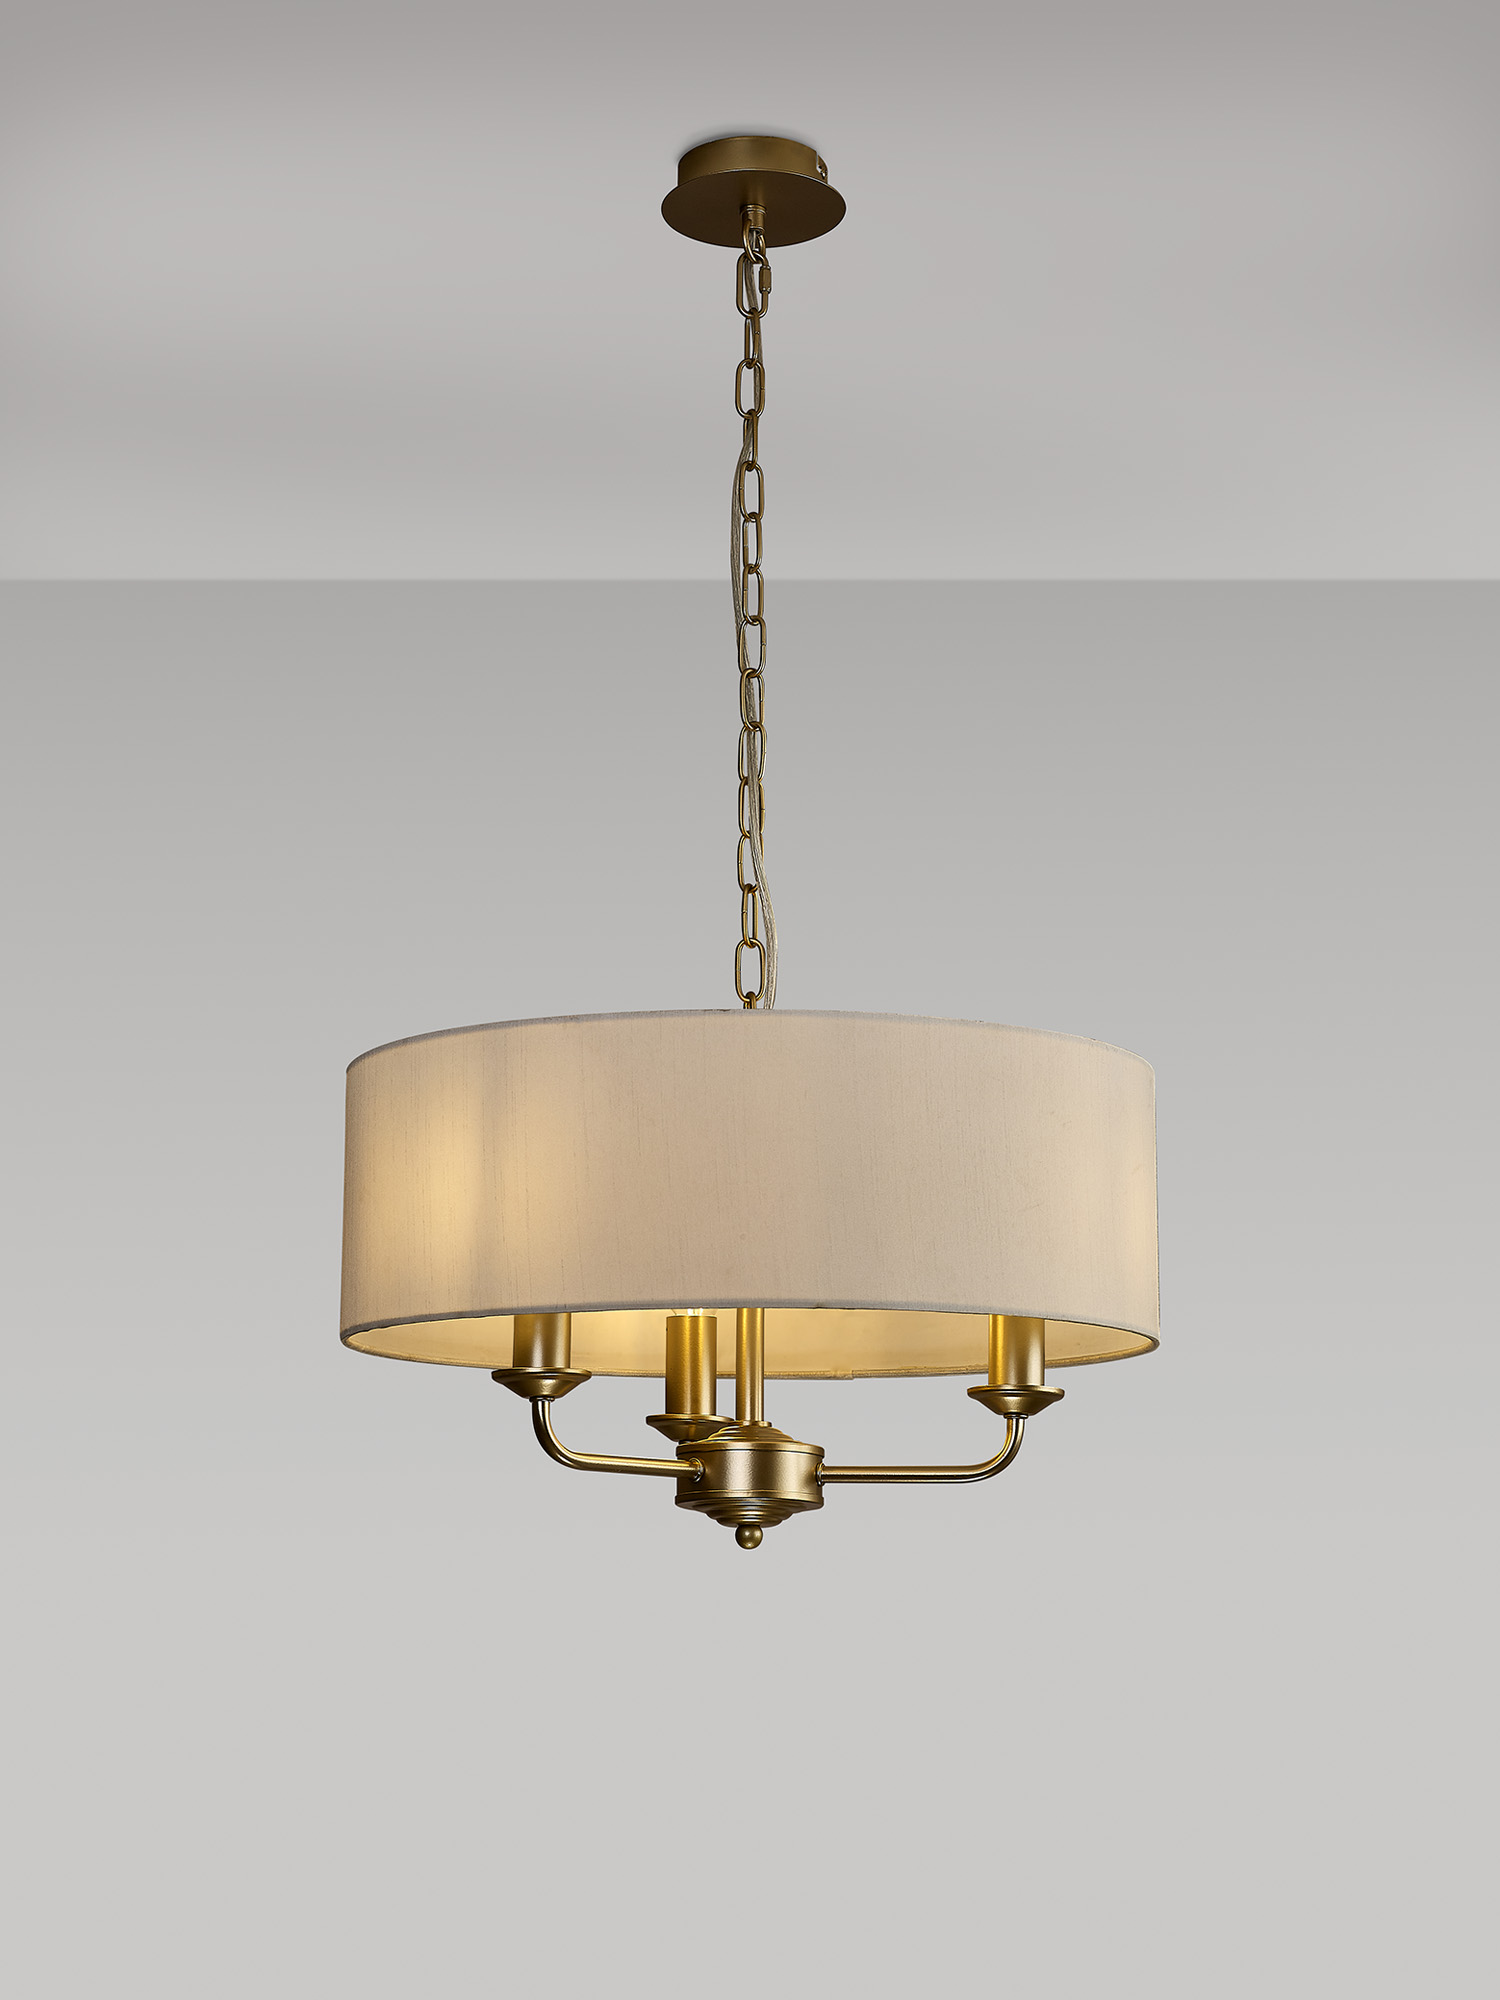 Banyan CG WH Ceiling Lights Deco Multi Arm Fittings